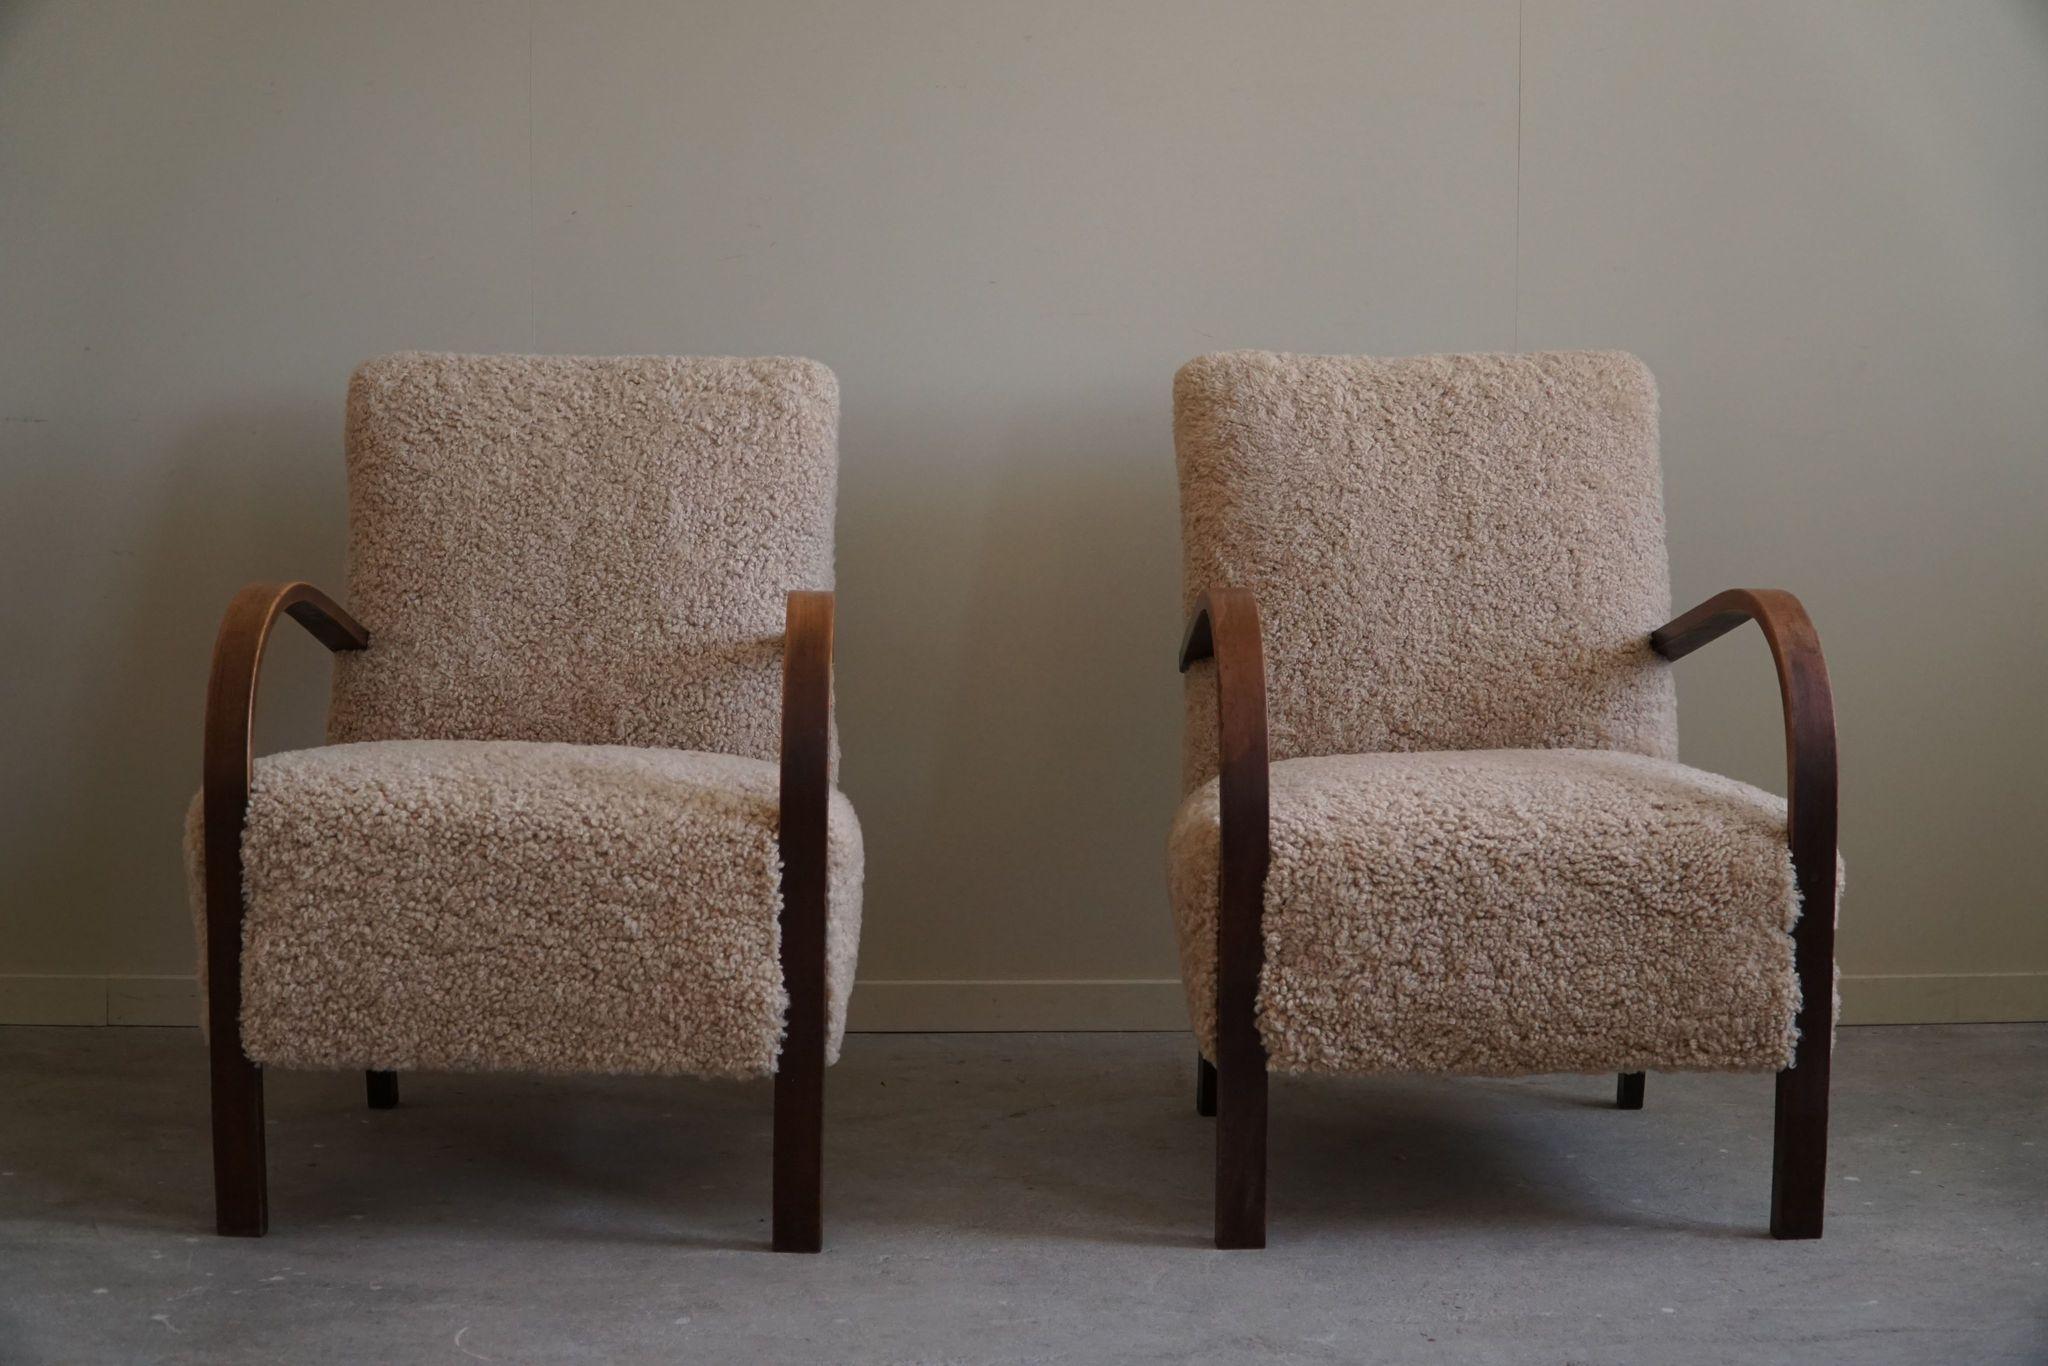 Fritz Hansen, Pair of Danish Curved Art Deco Lounge Chairs, Reupholstered, 1940s For Sale 9